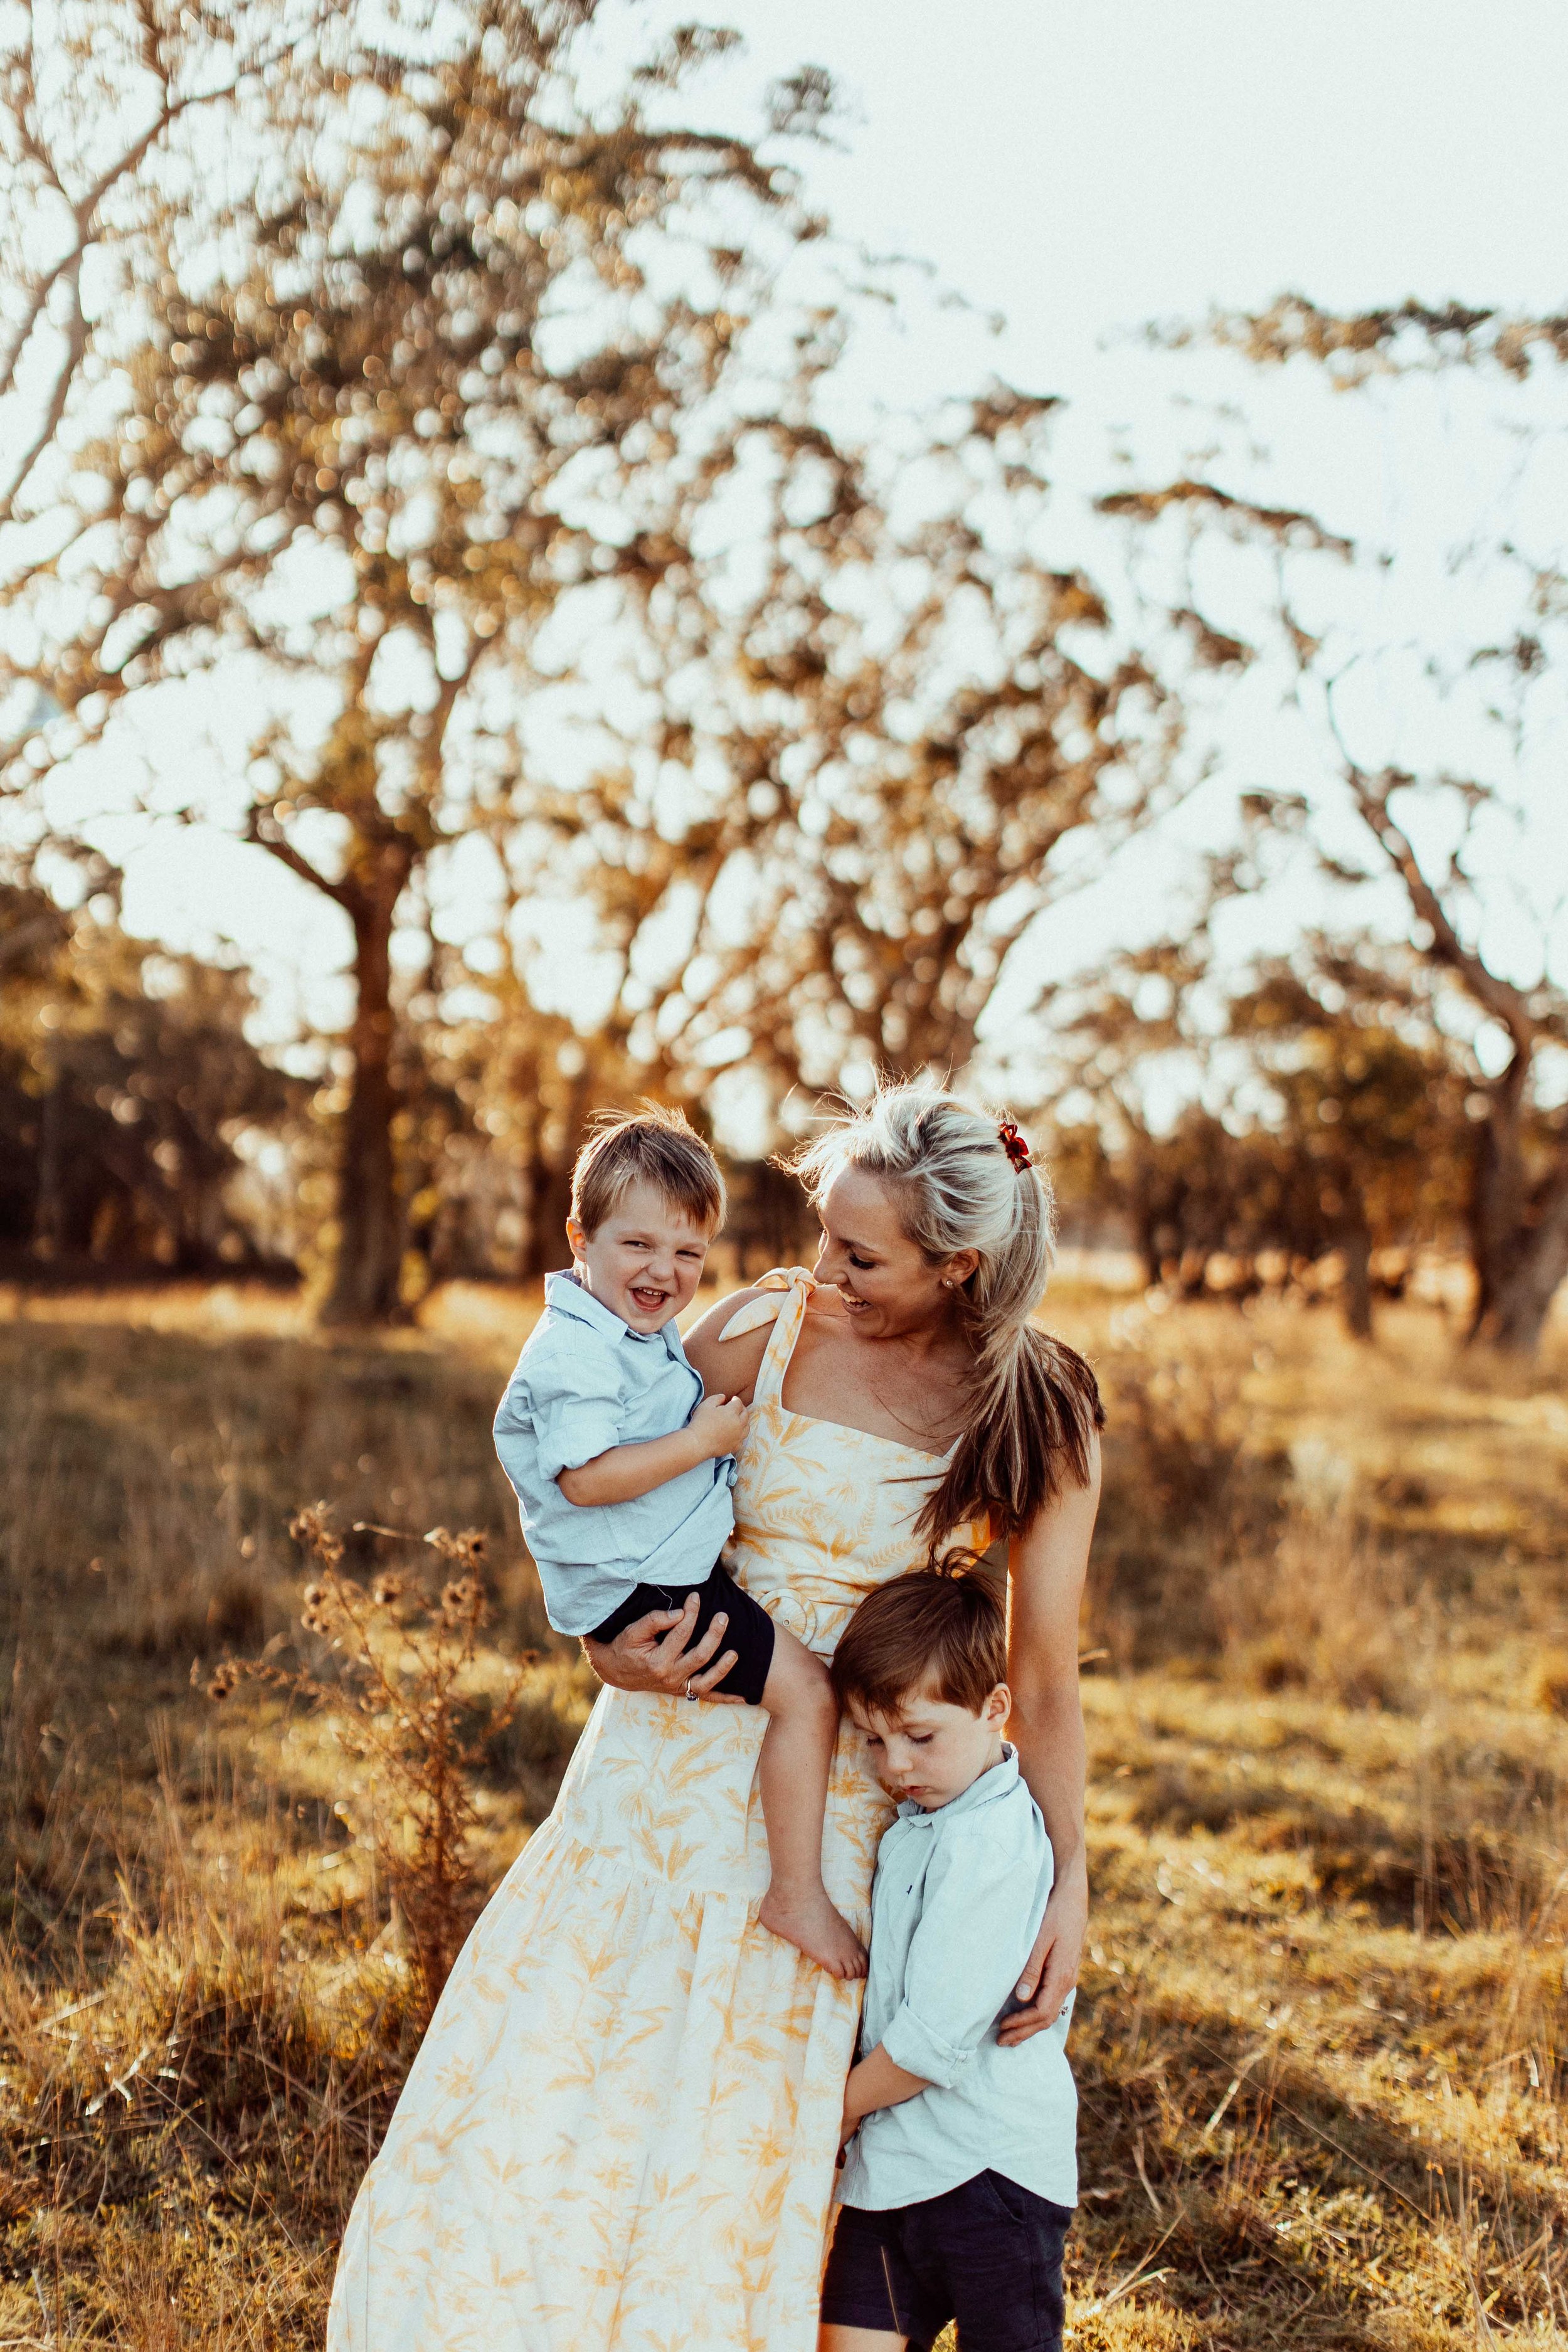 durney-family-exeter-southern-highlands-bowral-inhome-family-lifestyle-wollondilly-camden-macarthur-sydney-photography-www.emilyobrienphotography.net-55.jpg